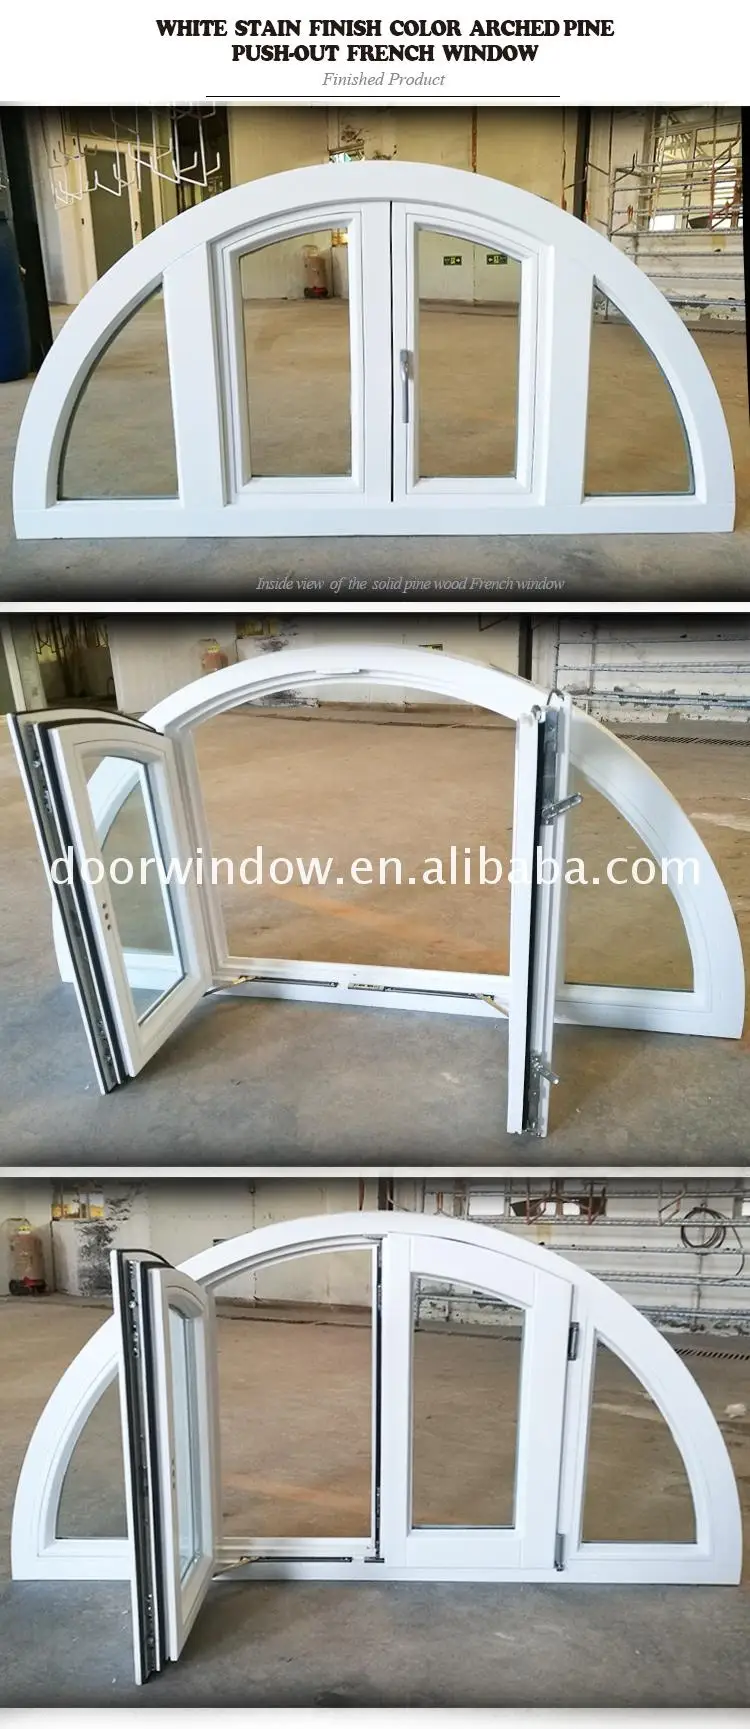 Window with black color arch top treatments for arched windows